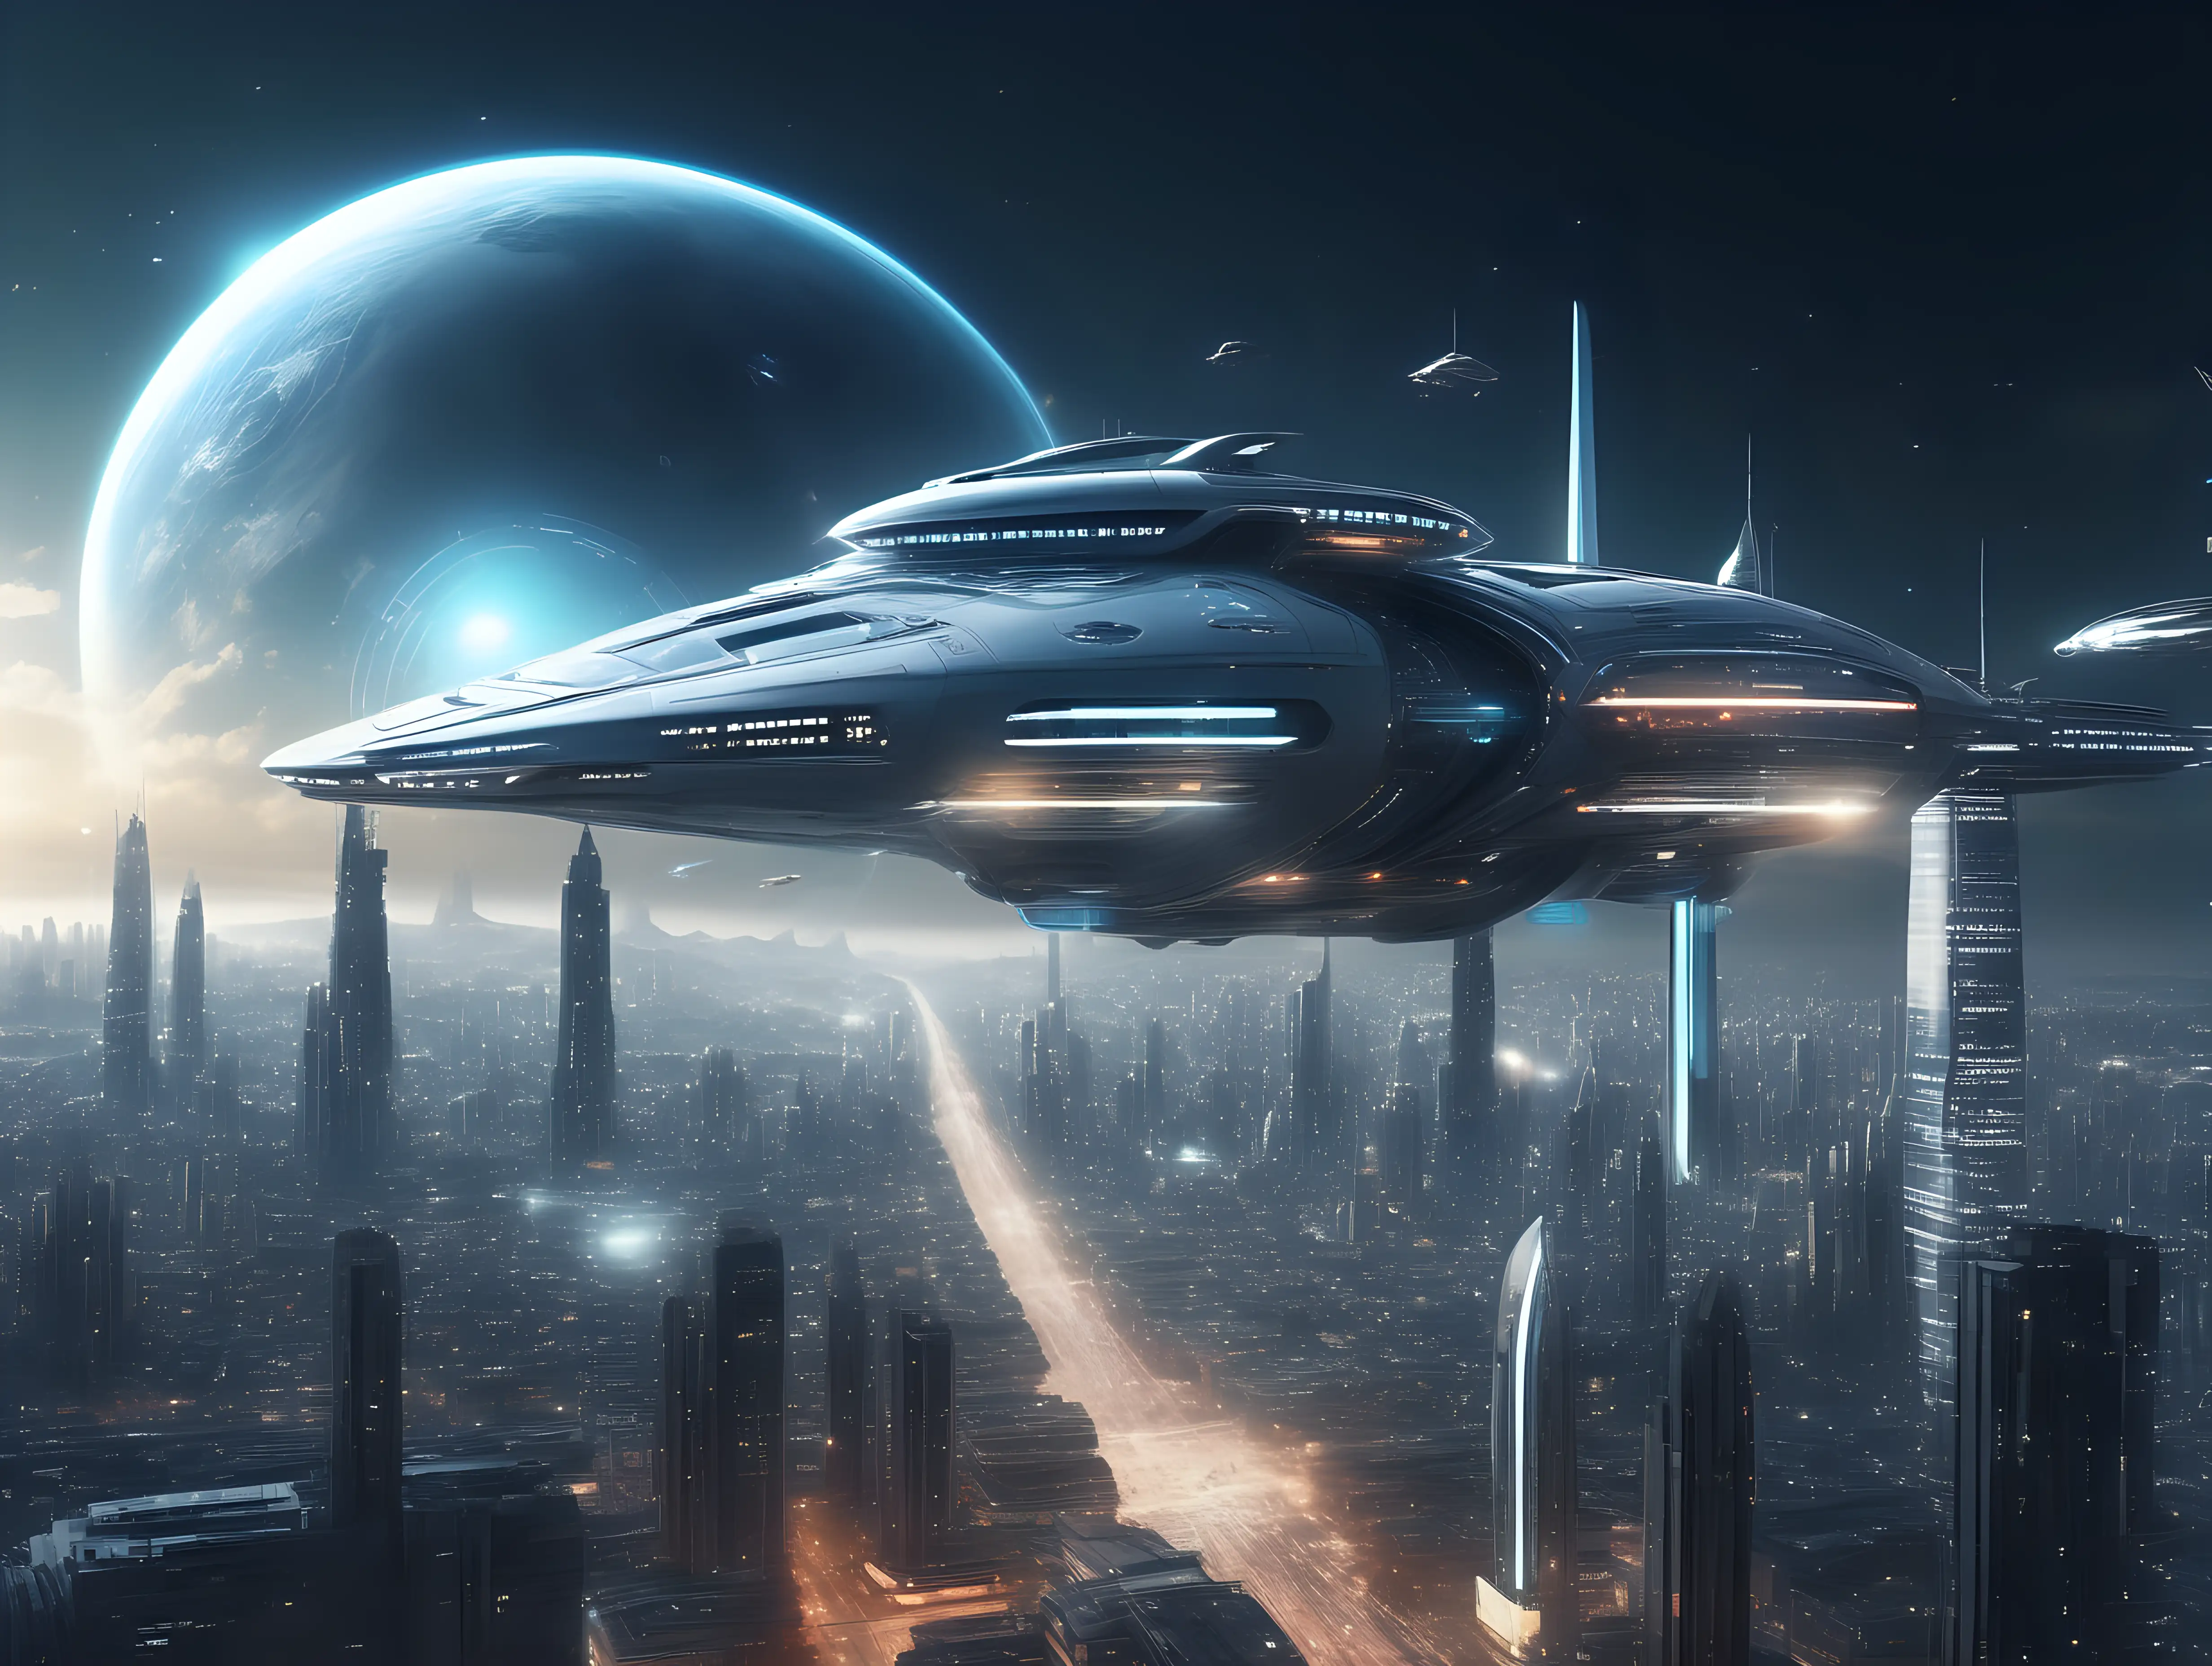 Futuristic Cityscape with Hovering Spaceship in HighResolution